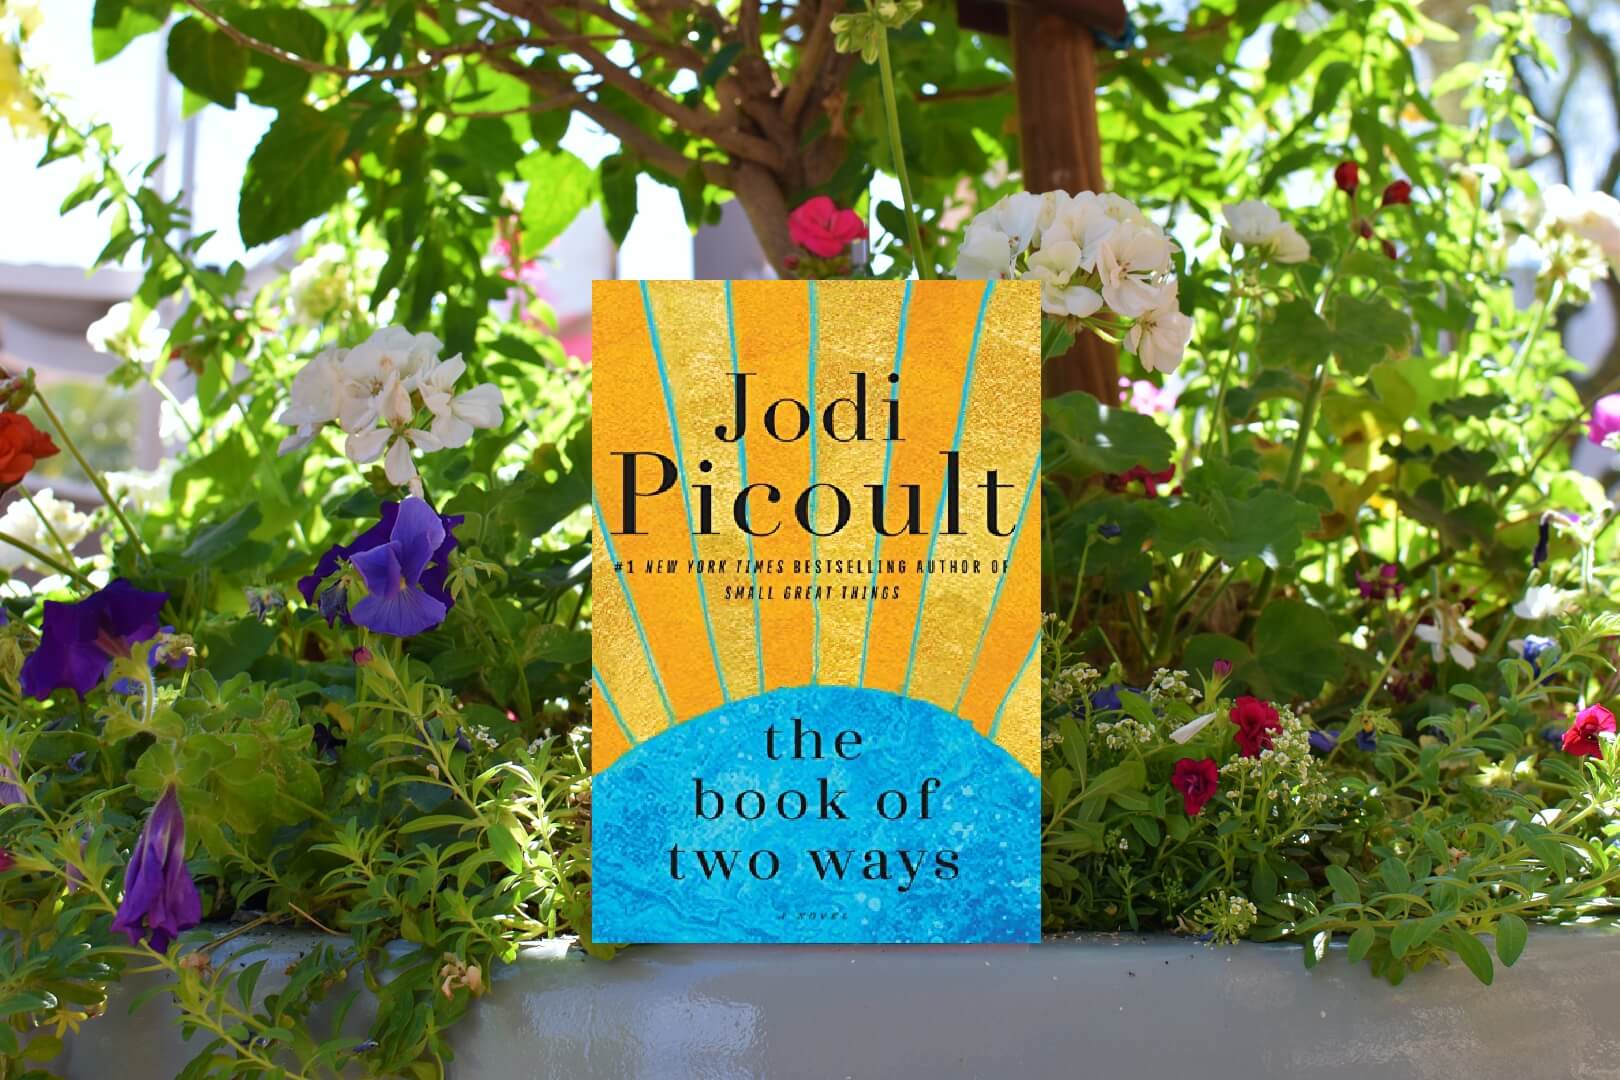 Book Club Questions for The Book of Two Ways by Jodi Picoult